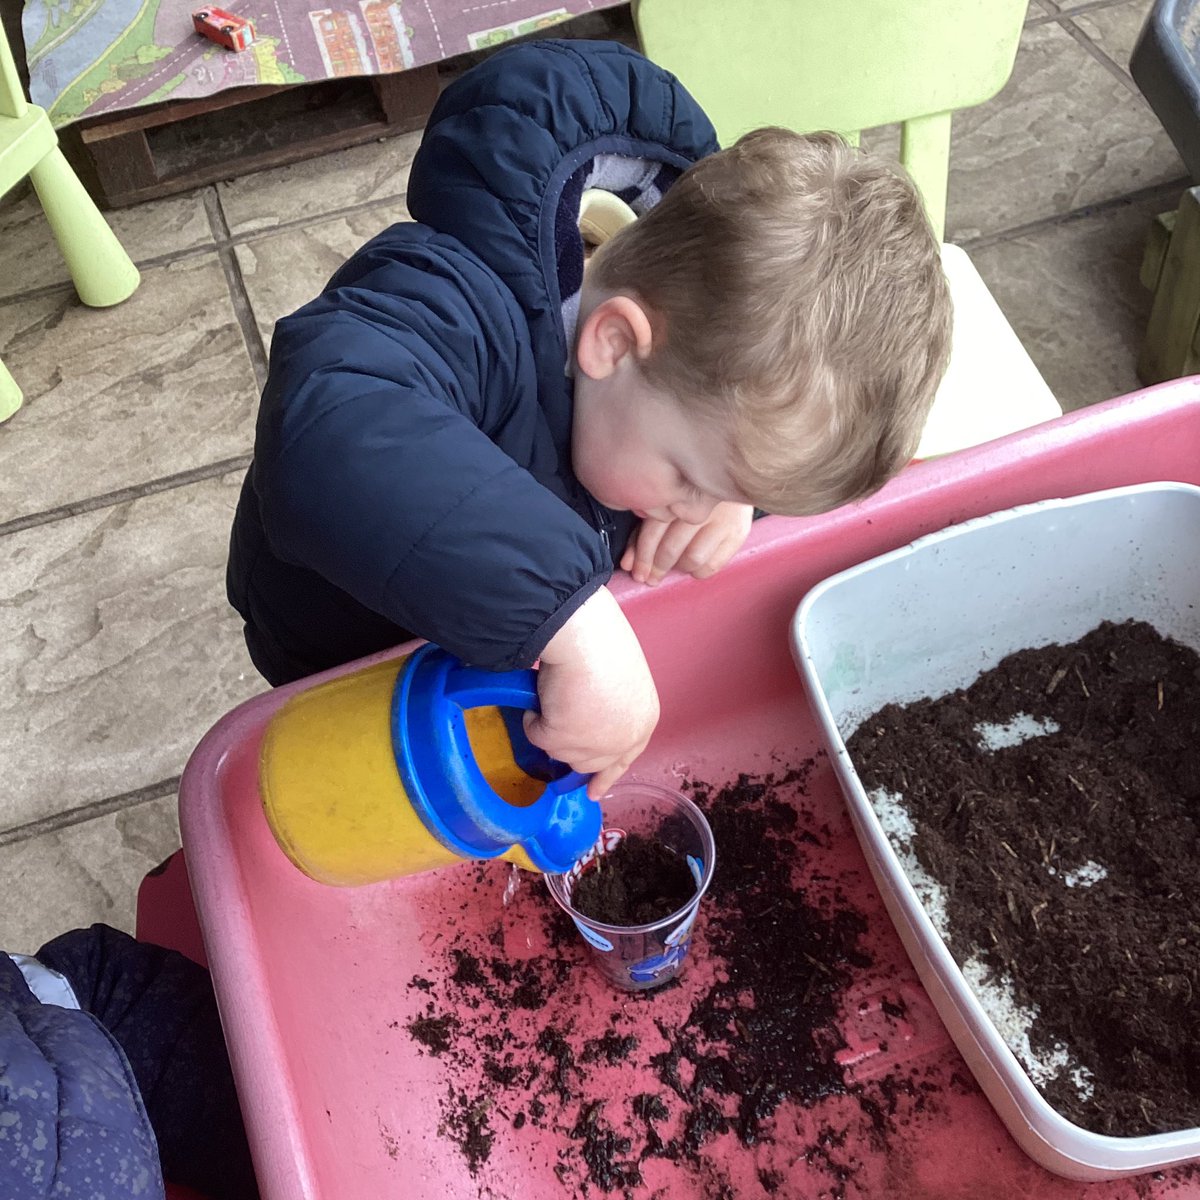 Exploring nature and fostering a love for gardening by planting broad beans with the little ones in Nursery today. 🌱👧🏽👦🏼  #GardeningFun #PlantingWithKids #GreenThumb'